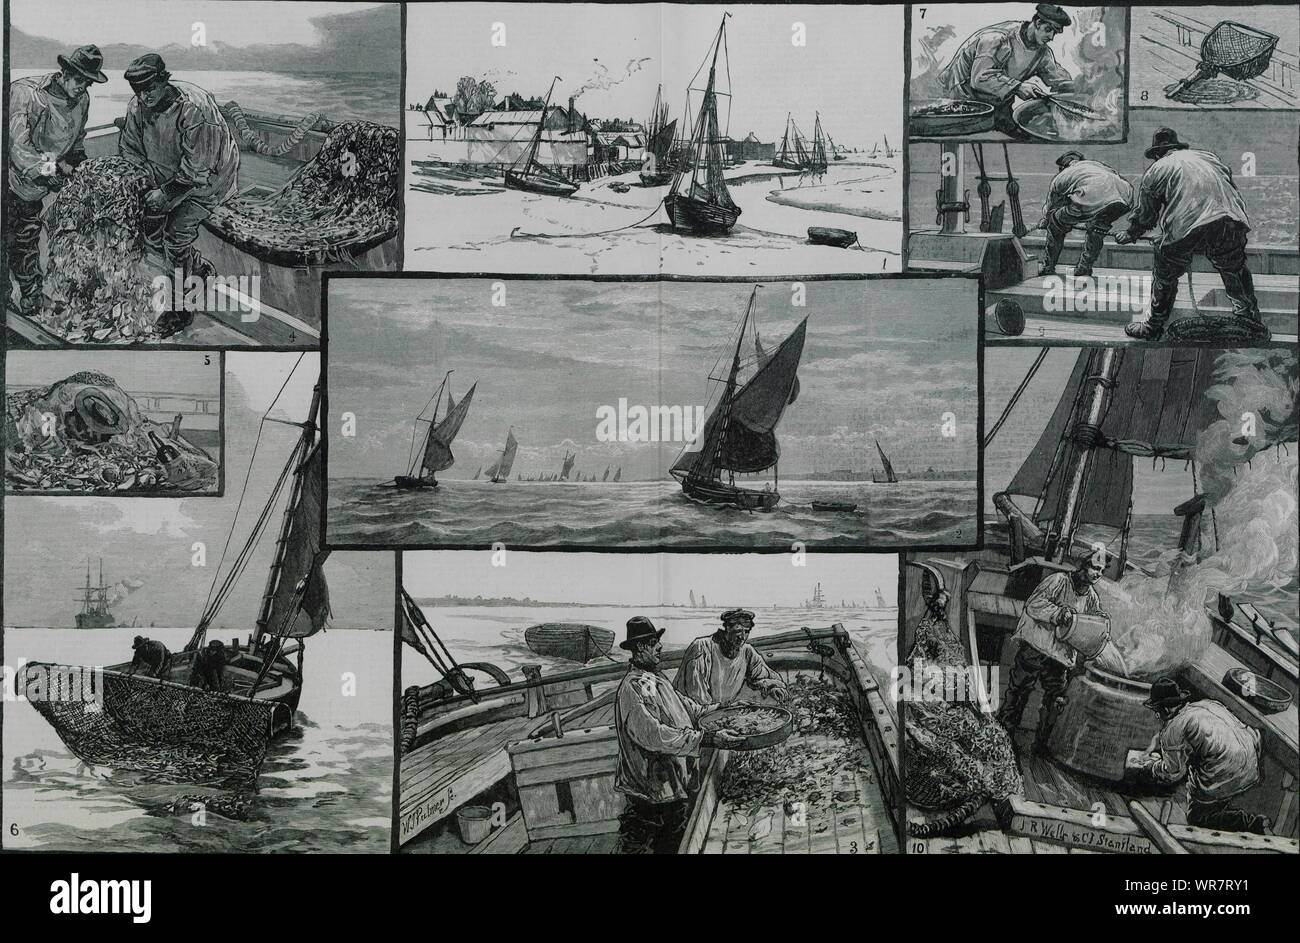 Shrimping at the mouth of the Thames. Leigh-on-Sea. Fishermen 1883 ILN print Stock Photo